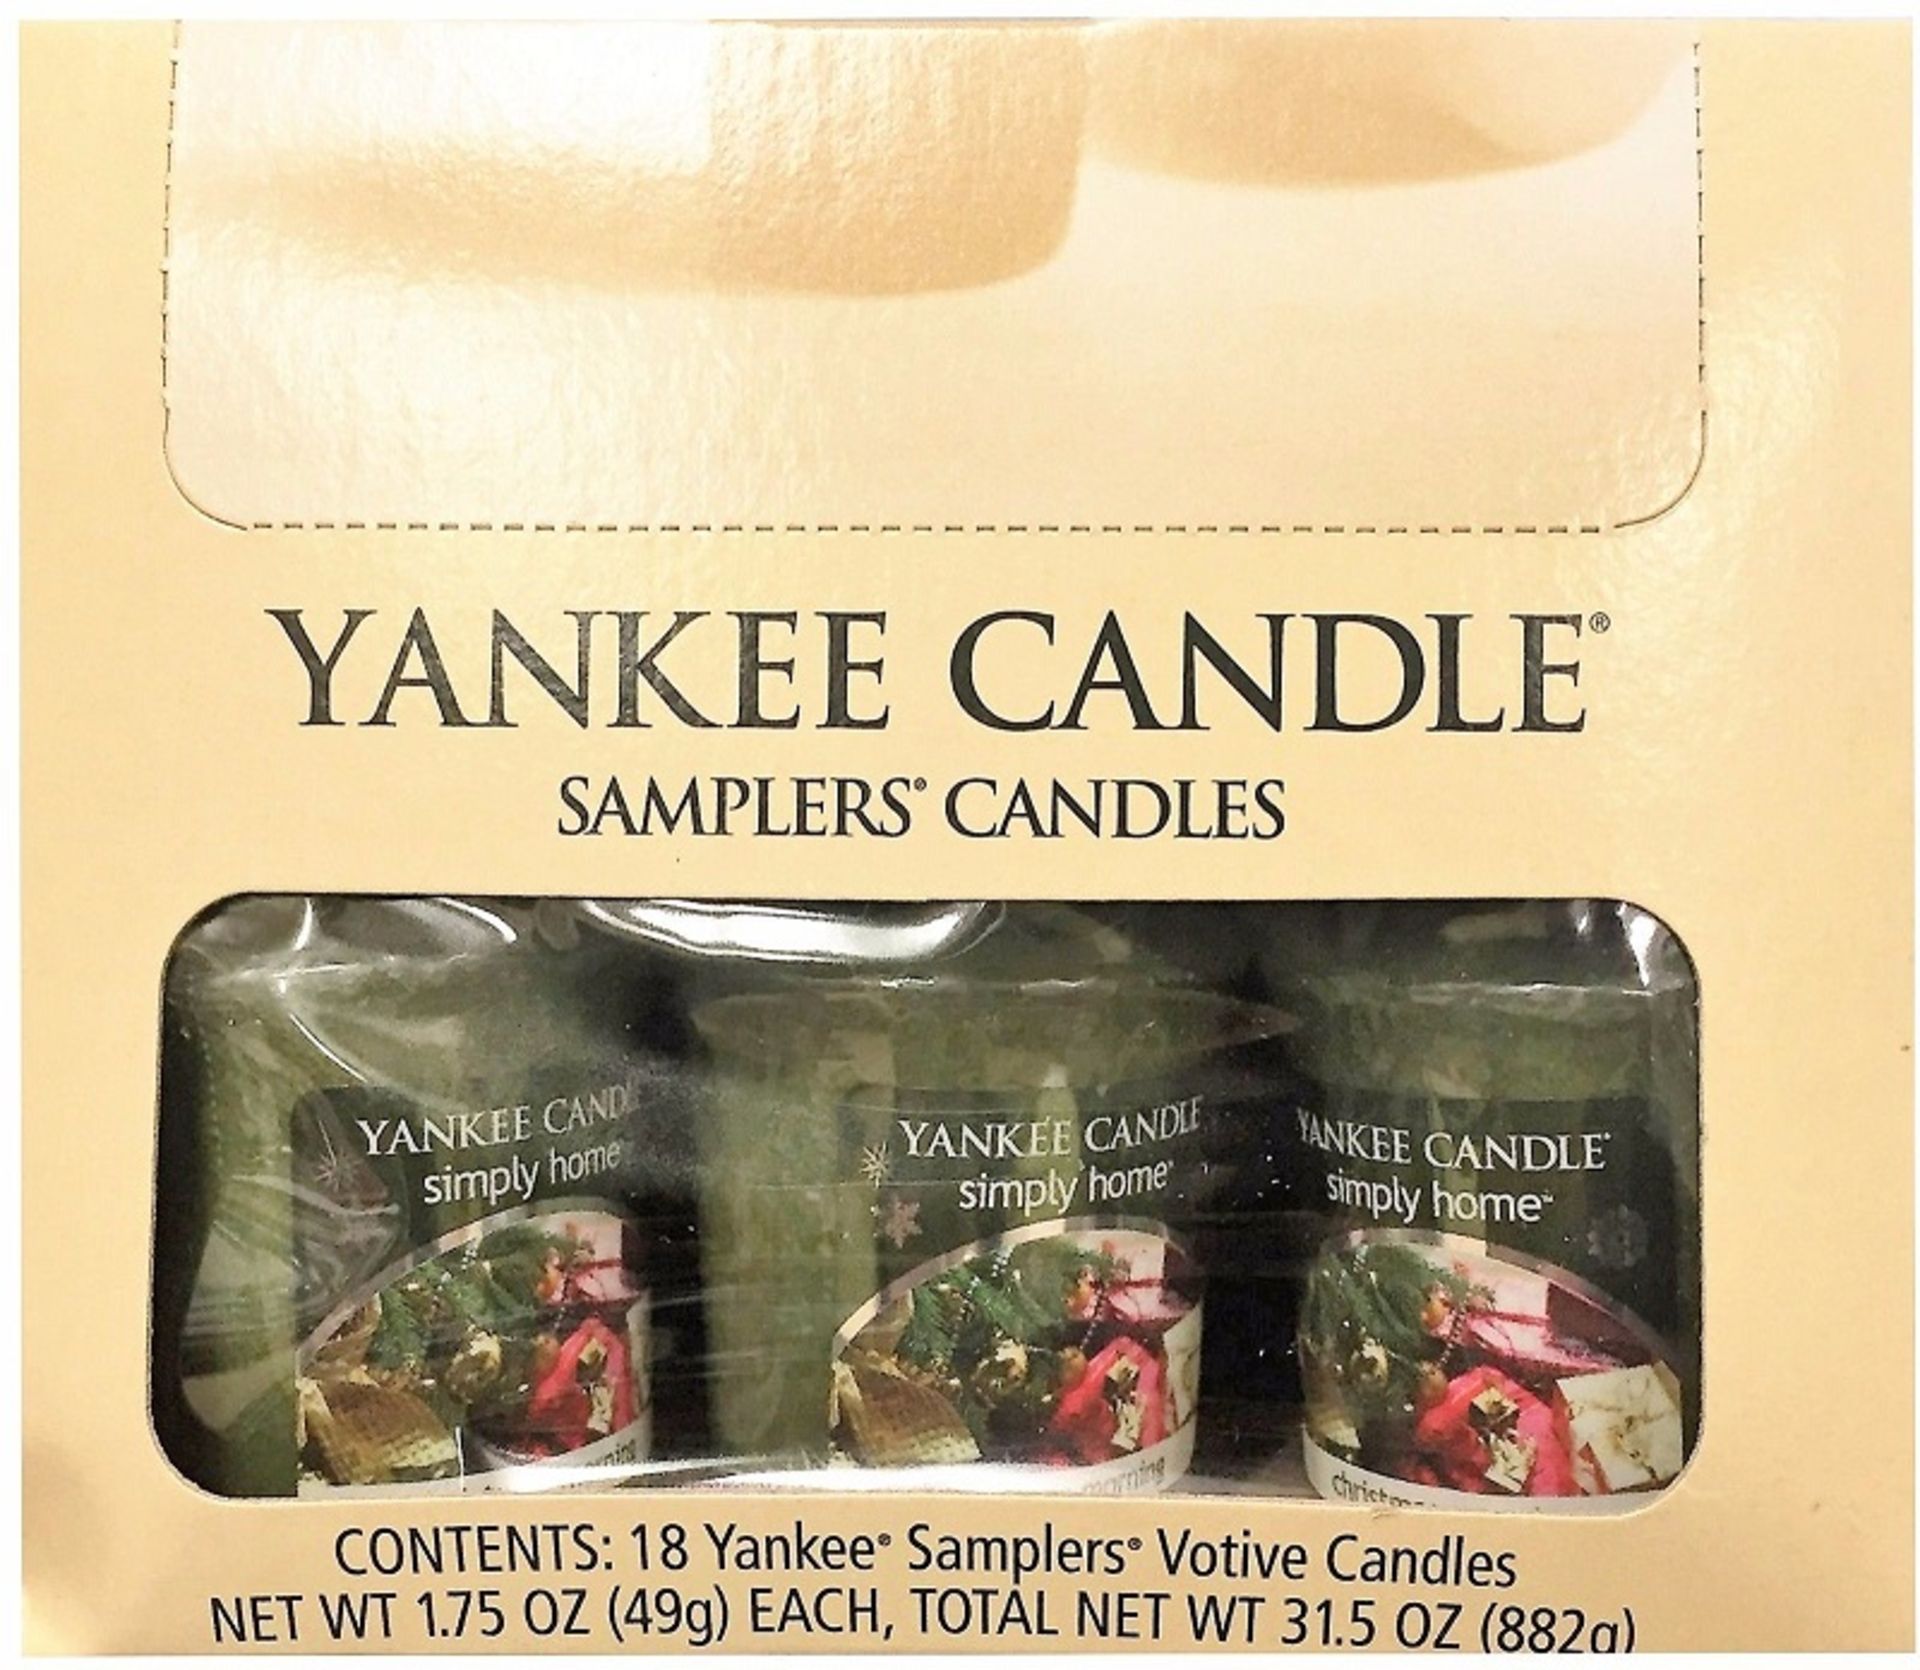 V *TRADE QTY* Brand New 18 x Yankee Candle Christmas Morning 49g eBay Price £19.99 X 4 YOUR BID - Image 2 of 2